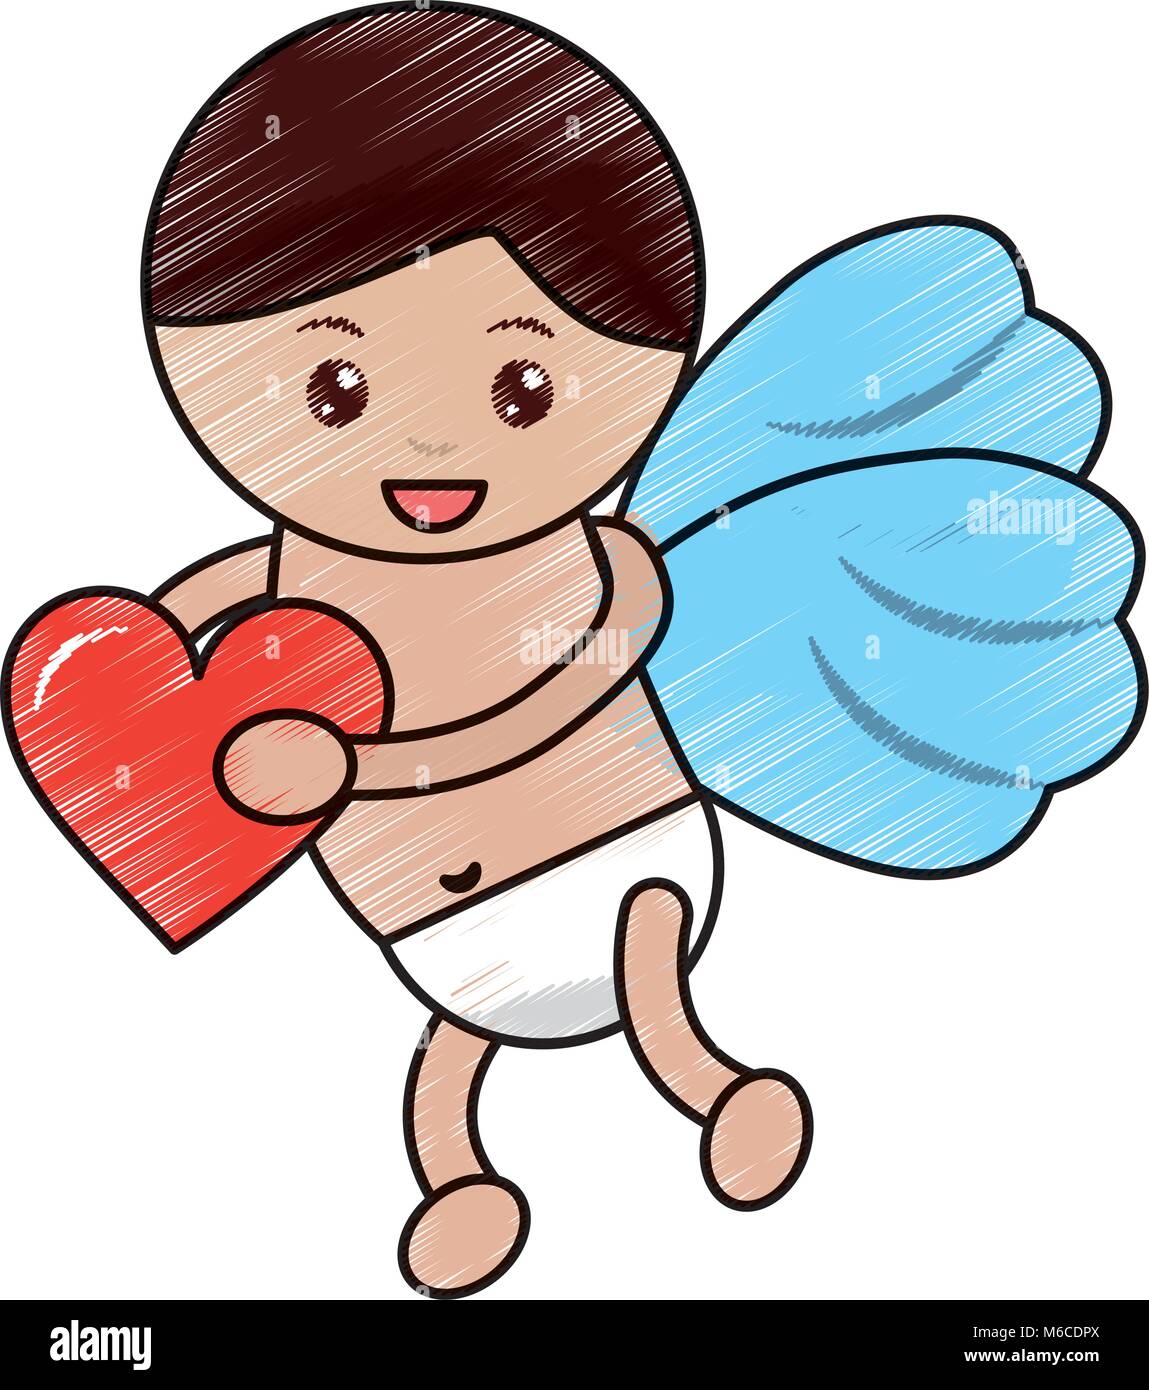 cupid holding heart valentines day icon image  Stock Vector